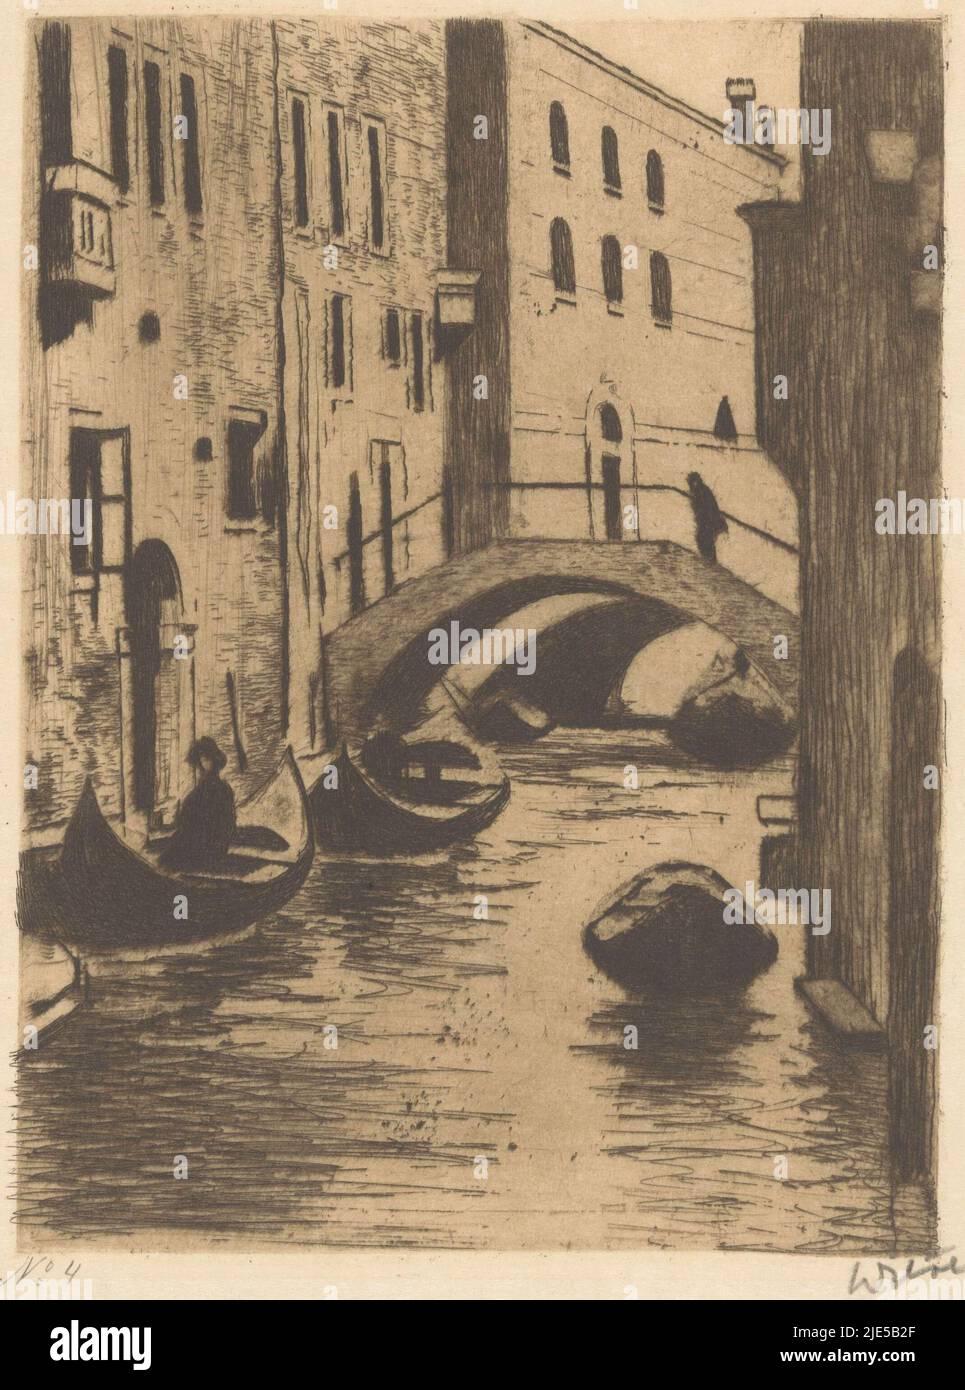 Bridge over the Rio di San Toma in Venice San Thoma, print maker: Willem Witsen, (signed by artist), printer: Mouton & Co., print maker: Amsterdam, printer: The Hague, c. 1914 - c. 1919, paper, etching, h 160 mm × w 121 mm Stock Photo